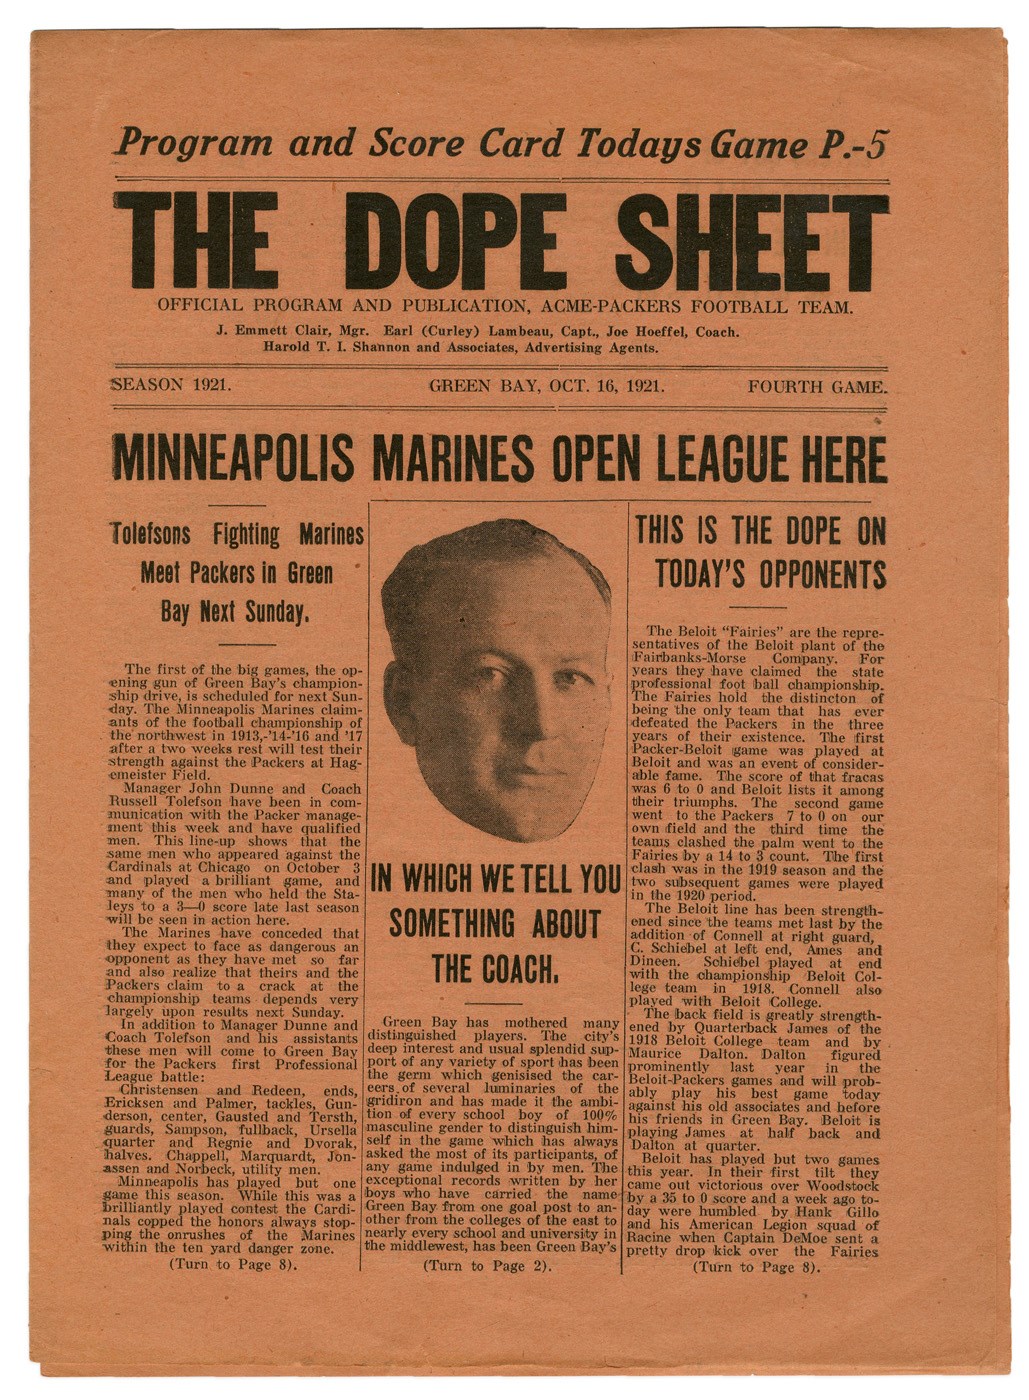 Football - 1921 Green Bay Packers Program - Second Ever & One of the Finest Known "Dope Sheets"